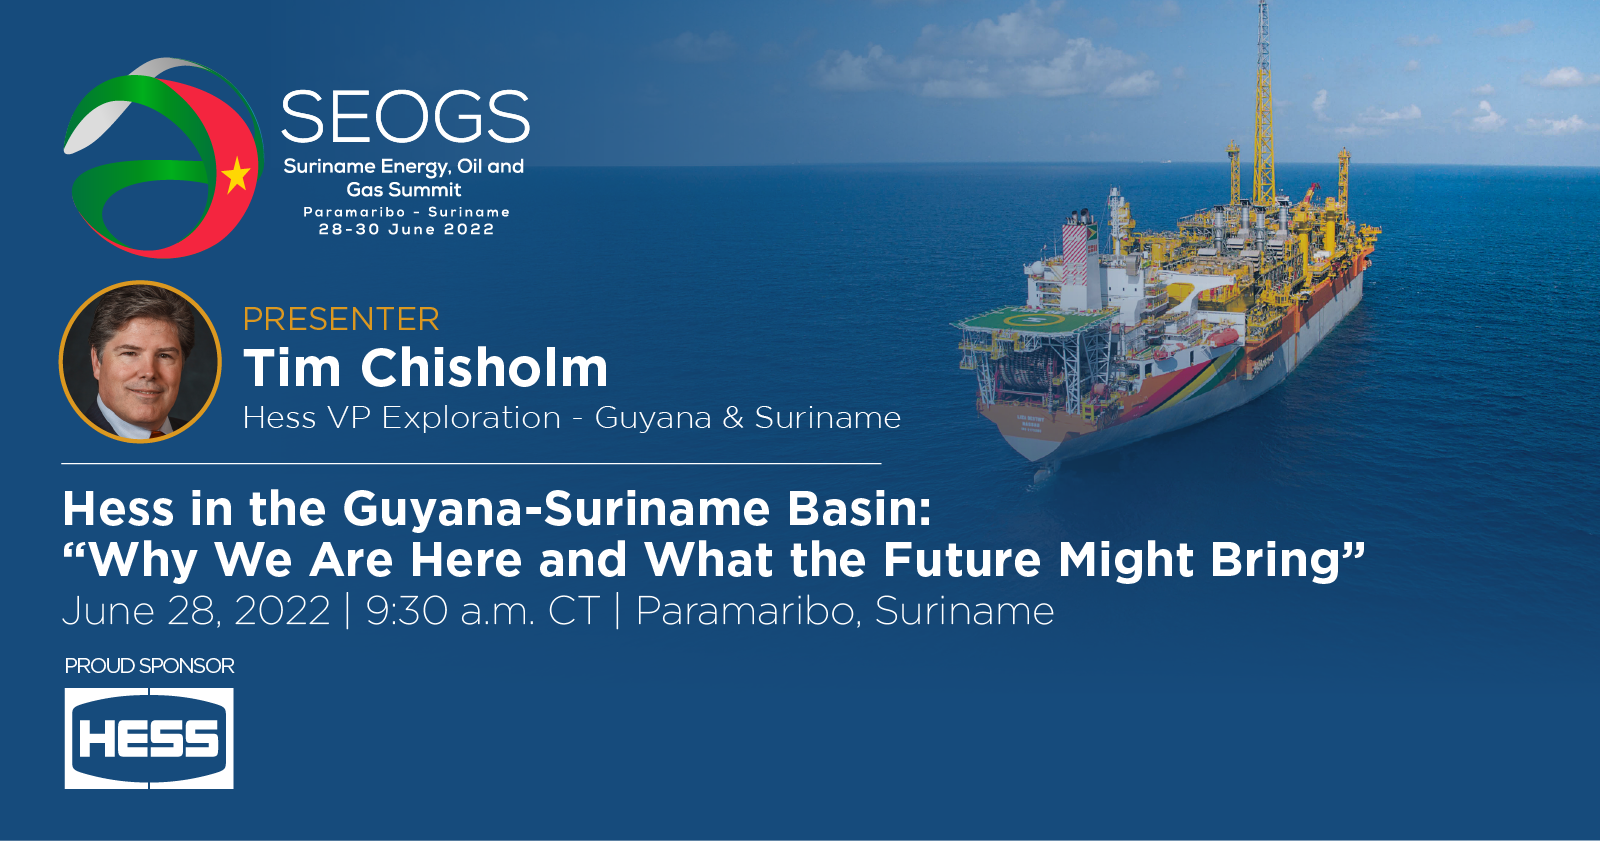 Tim Chisholm Presenter at 2022 Suriname Energy, Oil and Gas Summit